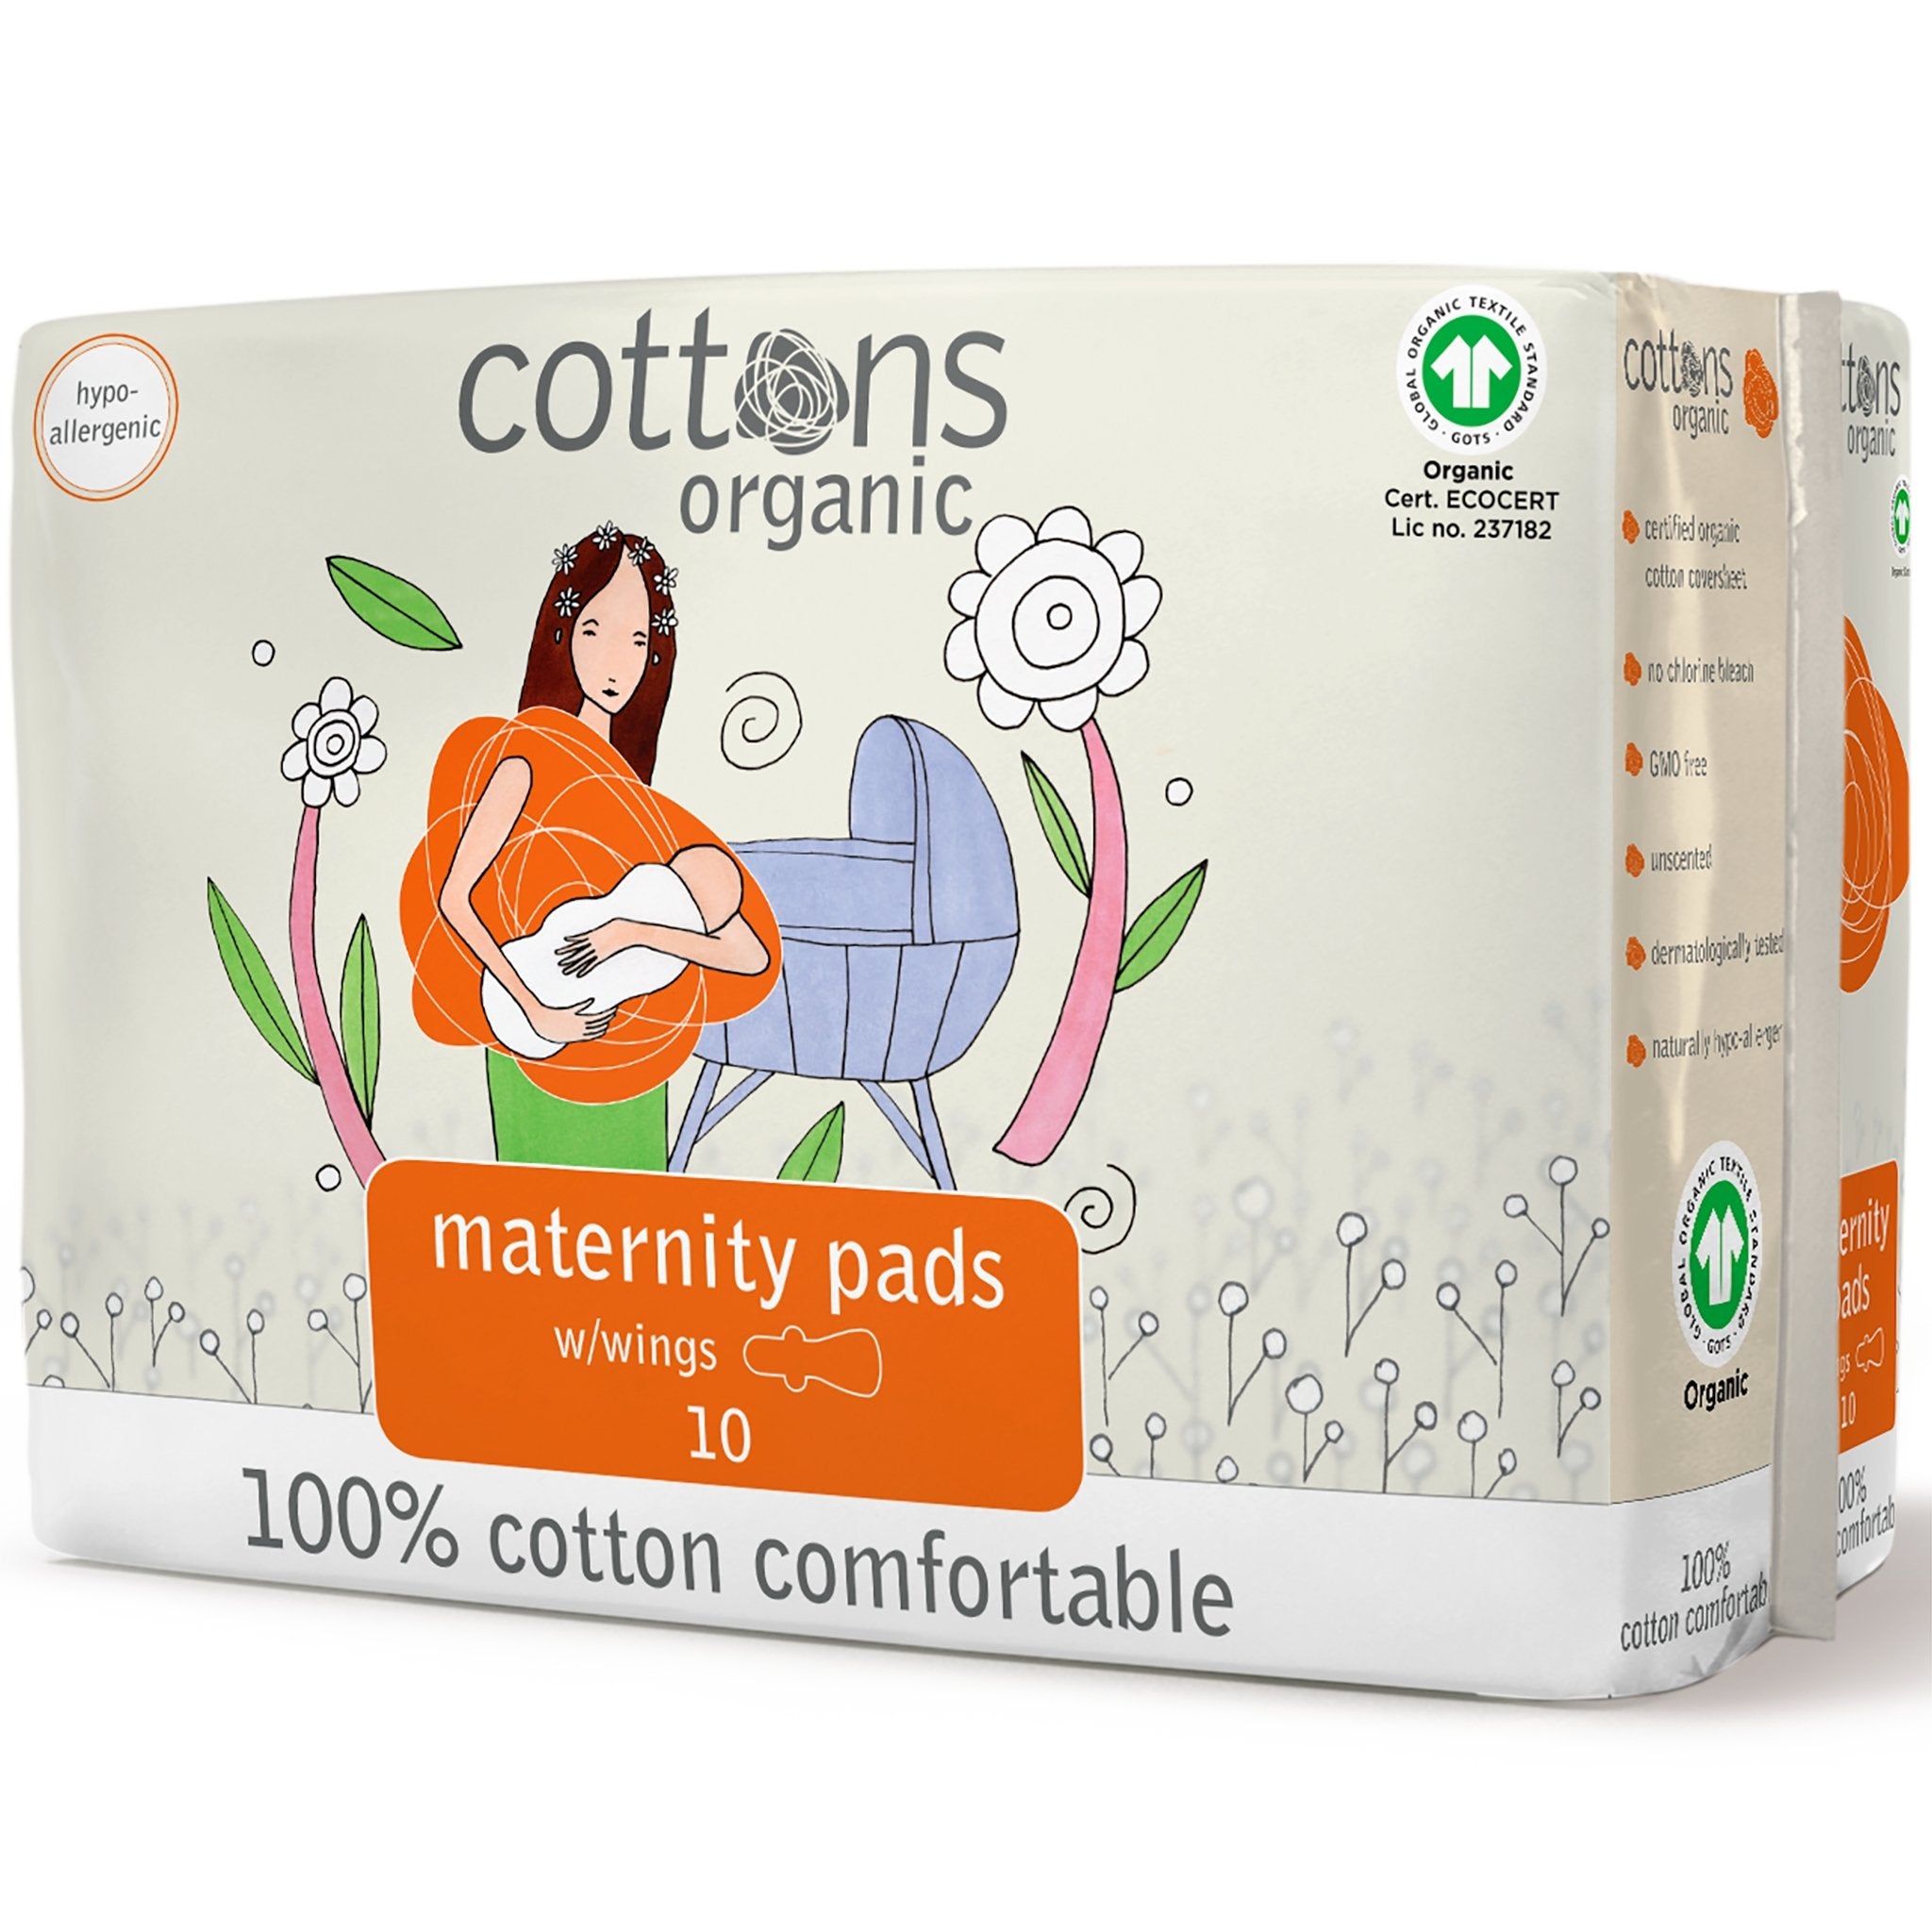 Maternity Pads with Wings - mypure.co.uk